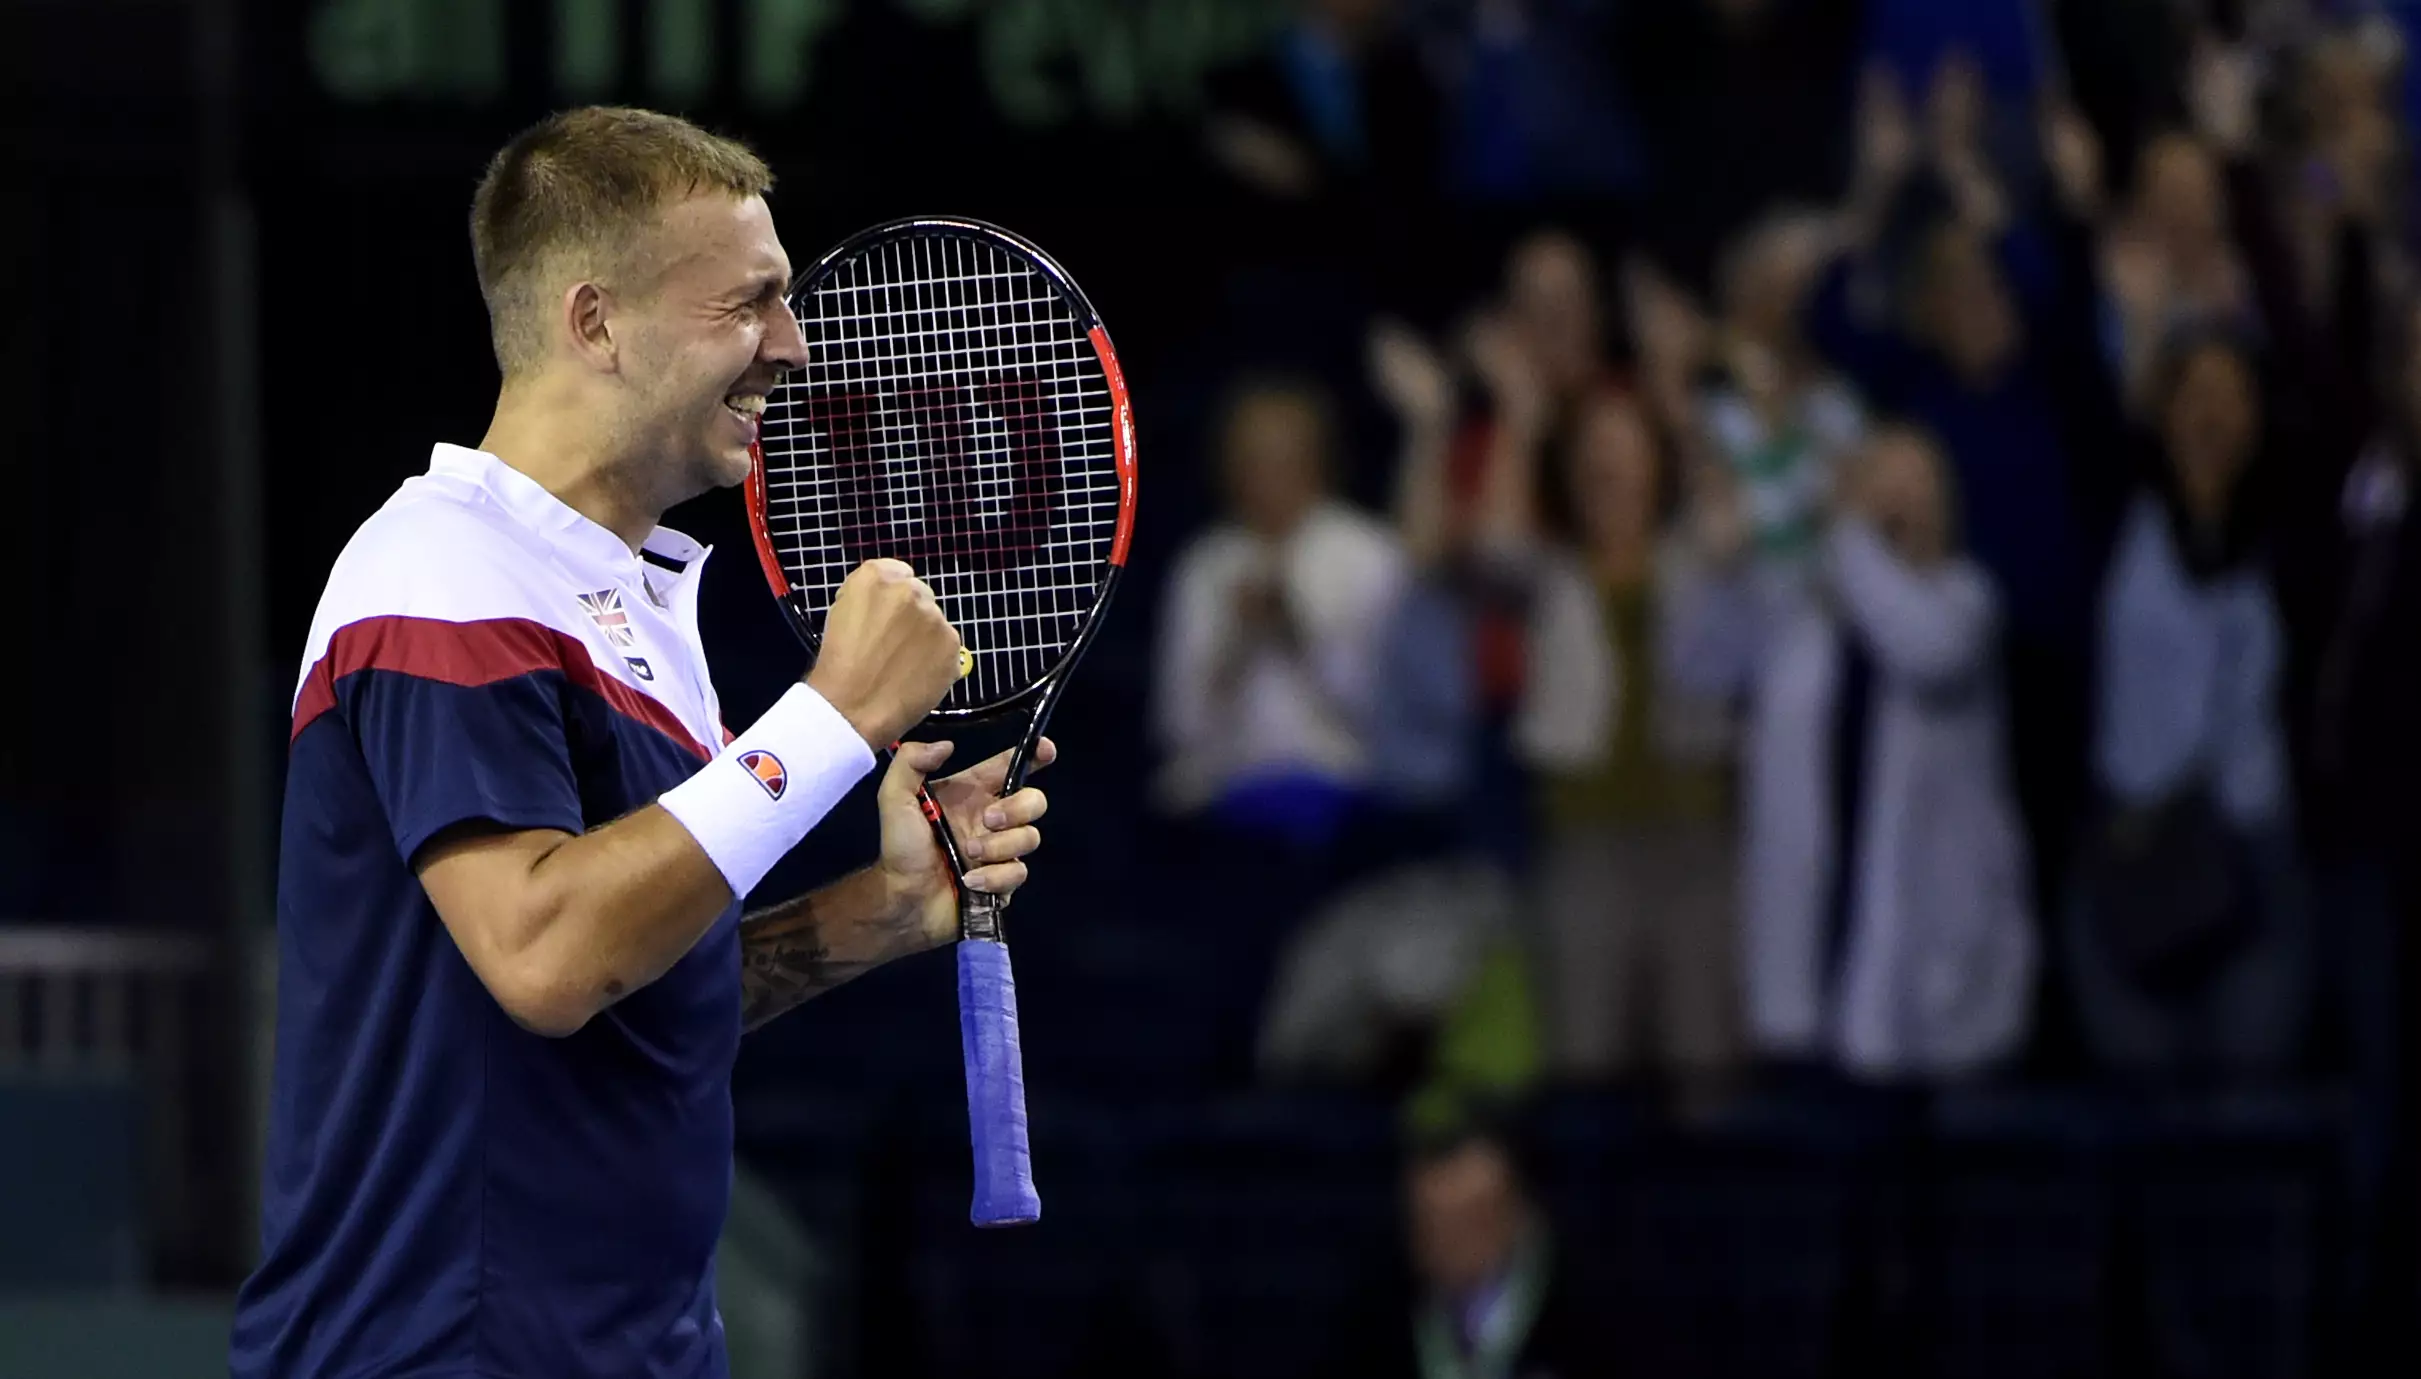 Evans played in the Davis Cup in September. Image: PA Images